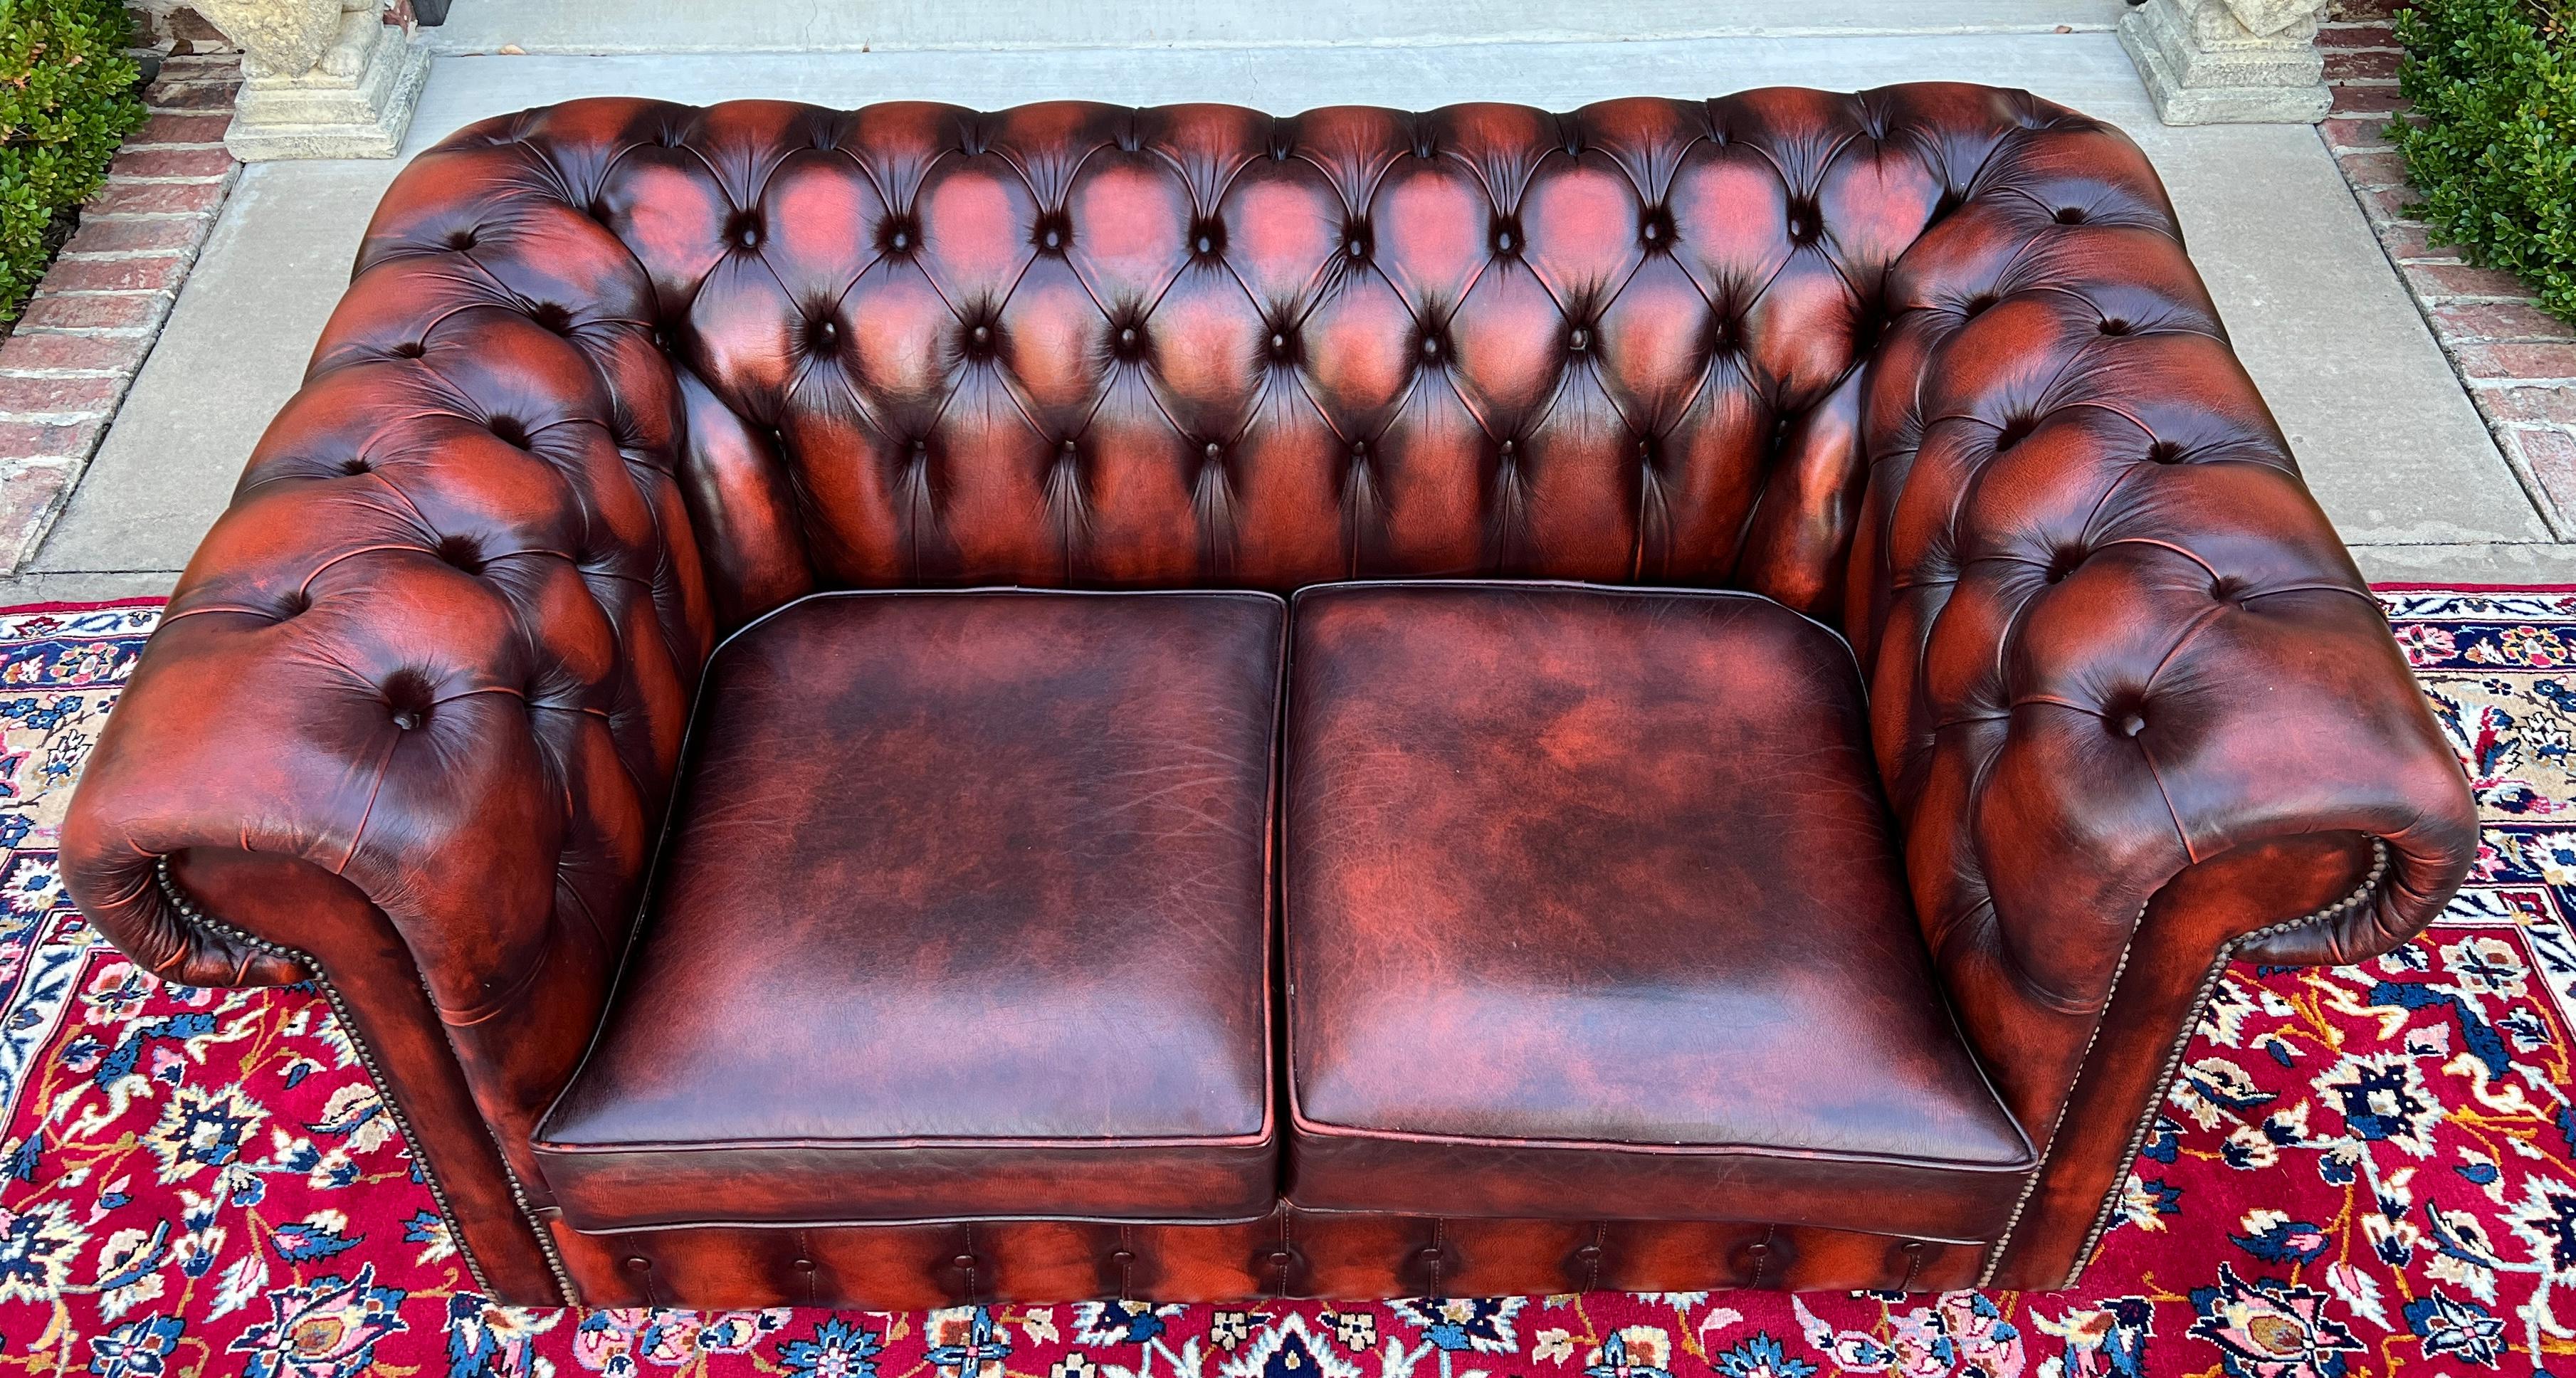 Vintage English Chesterfield Leather Tufted Love Seat Sofa Oxblood Red #1 For Sale 7